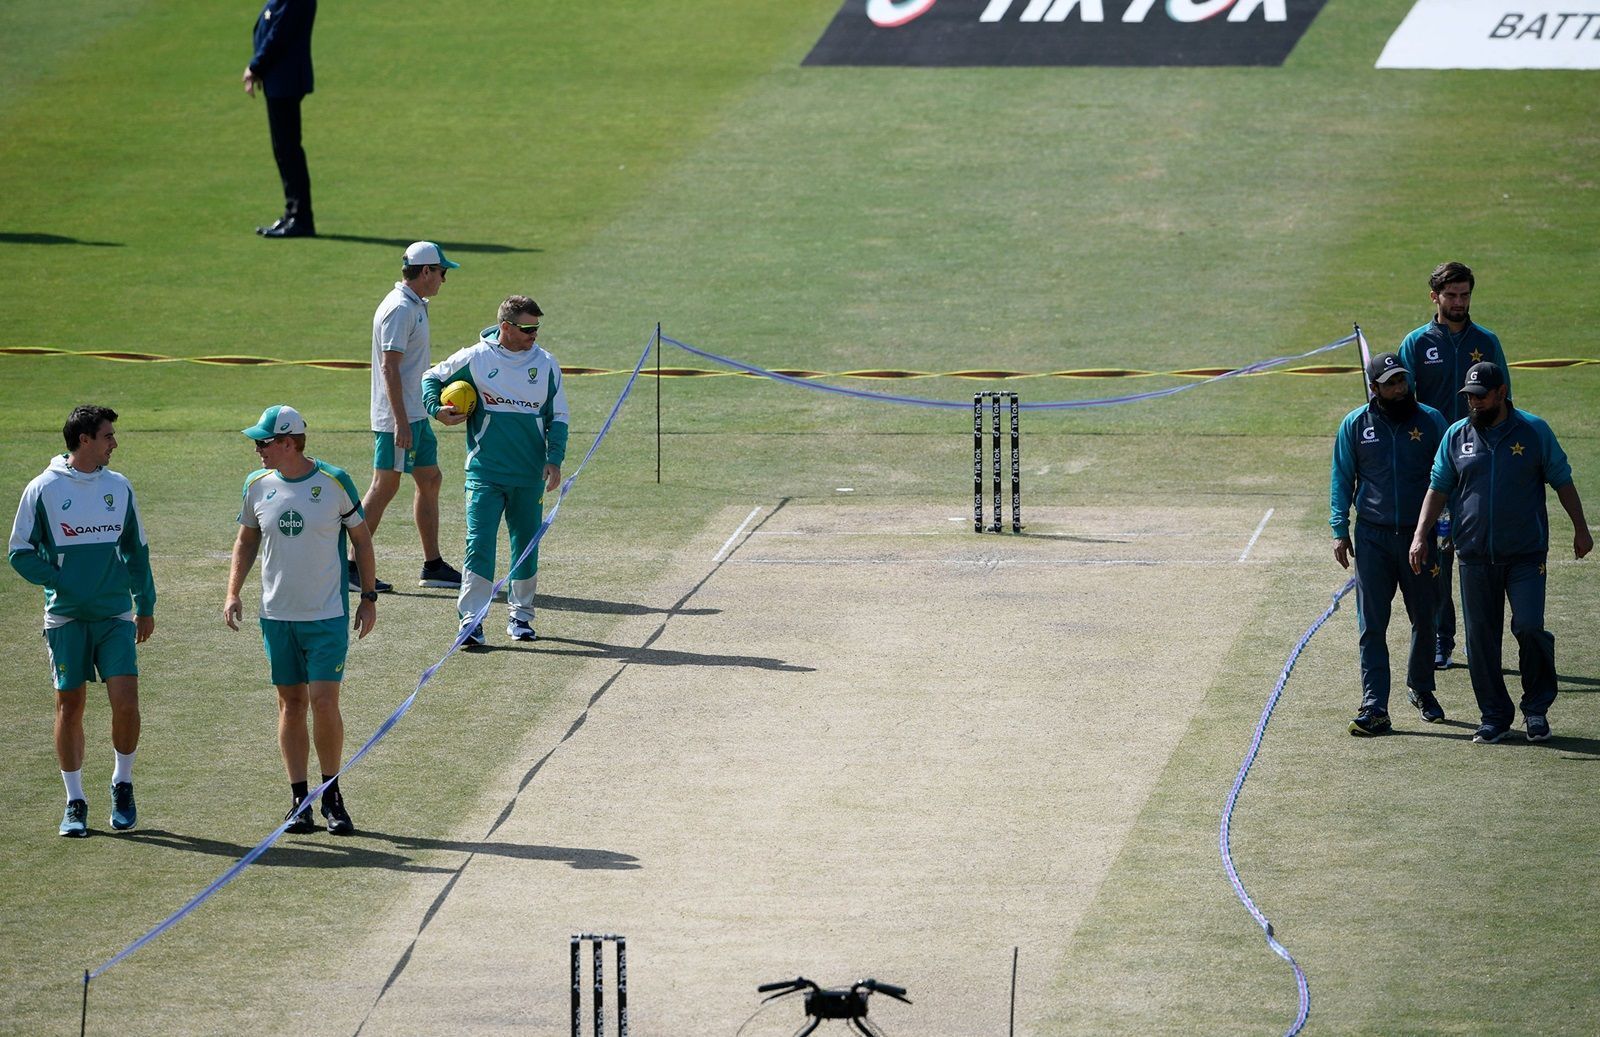 Pindi Cricket Stadium could face three demerit points if the pitch is rated poor